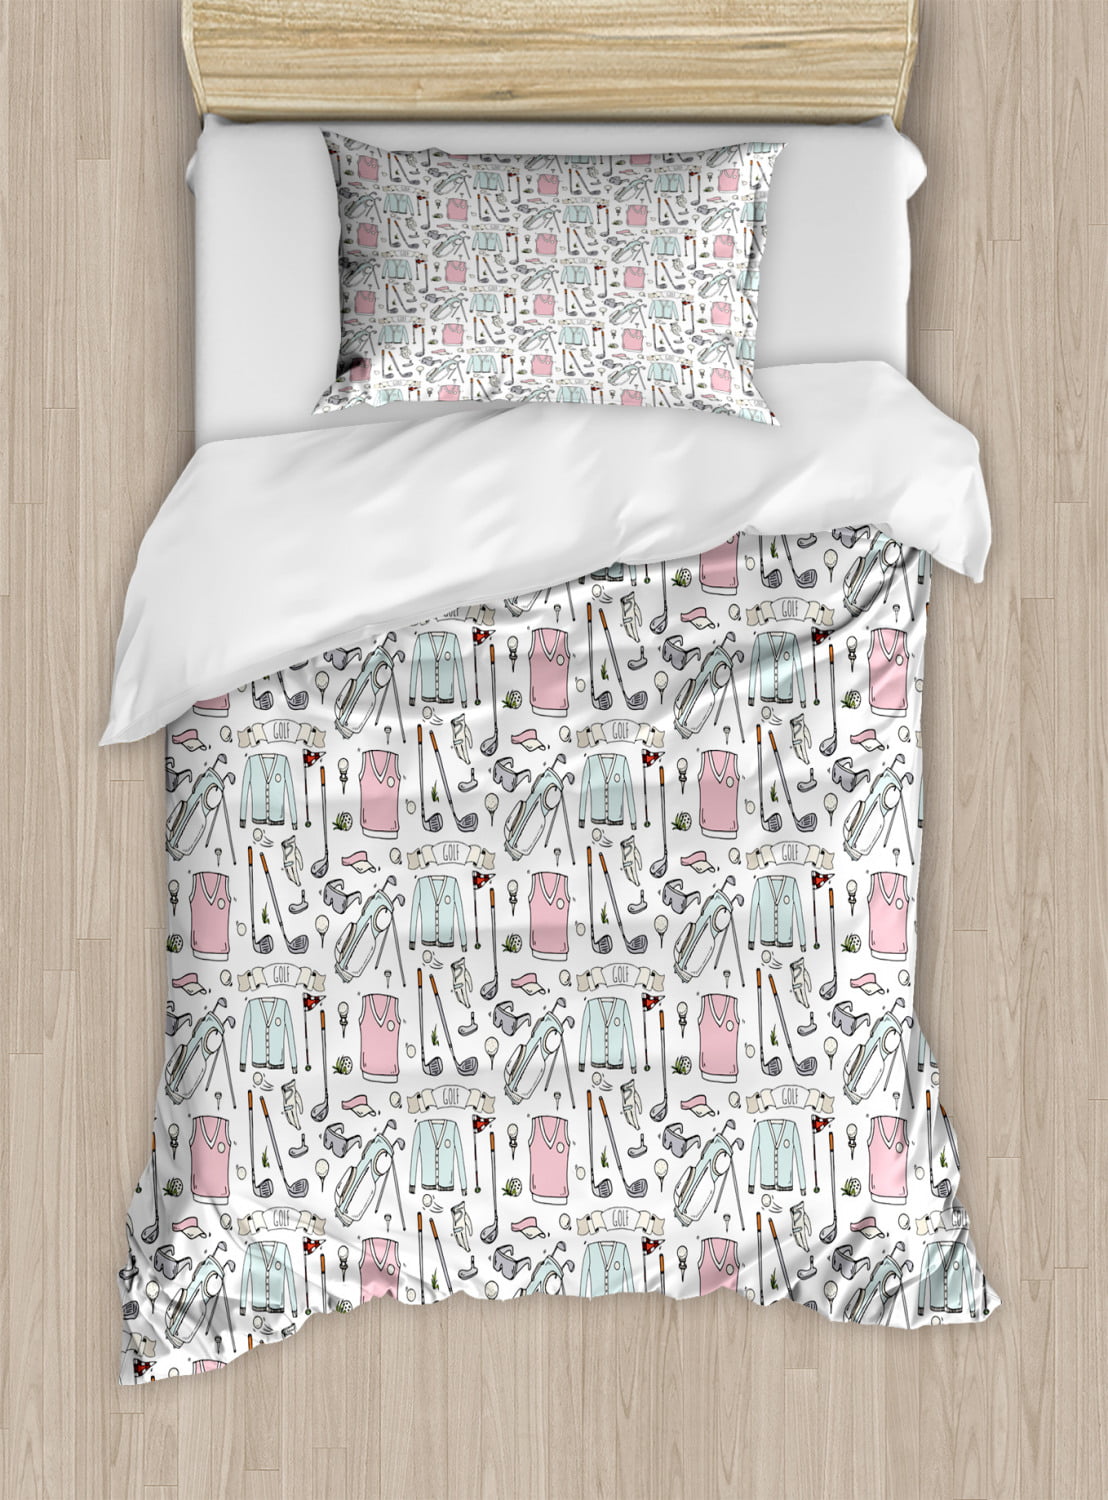 Golf Duvet Cover Set Twin Size Doodle, Polo King Bedding